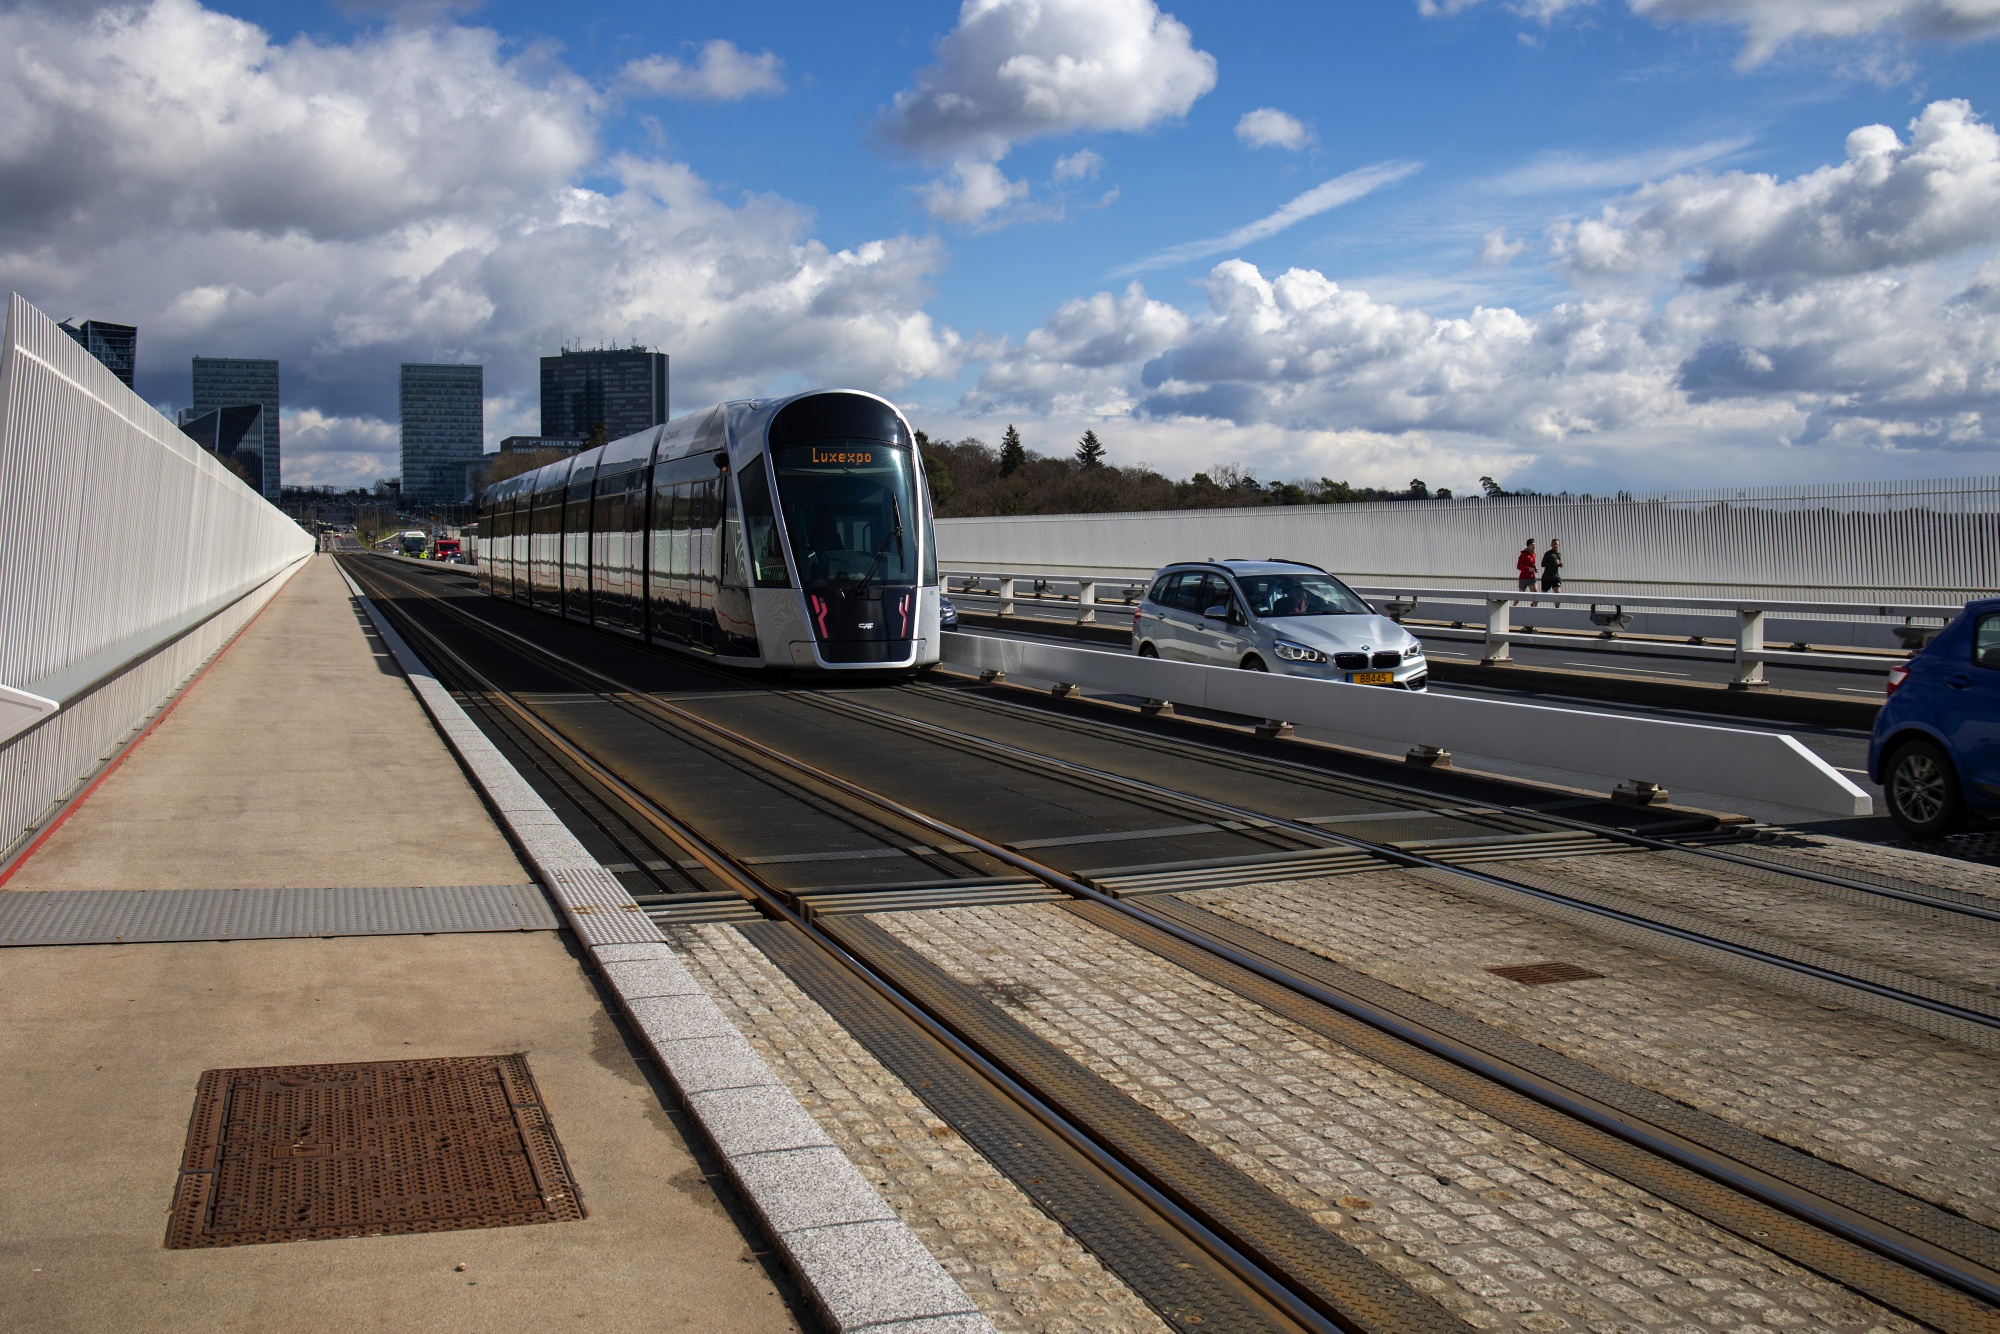 Luxembourg launched a tram service in 2017 in an effort to get more residents out of their&nbsp;automobiles.&nbsp;